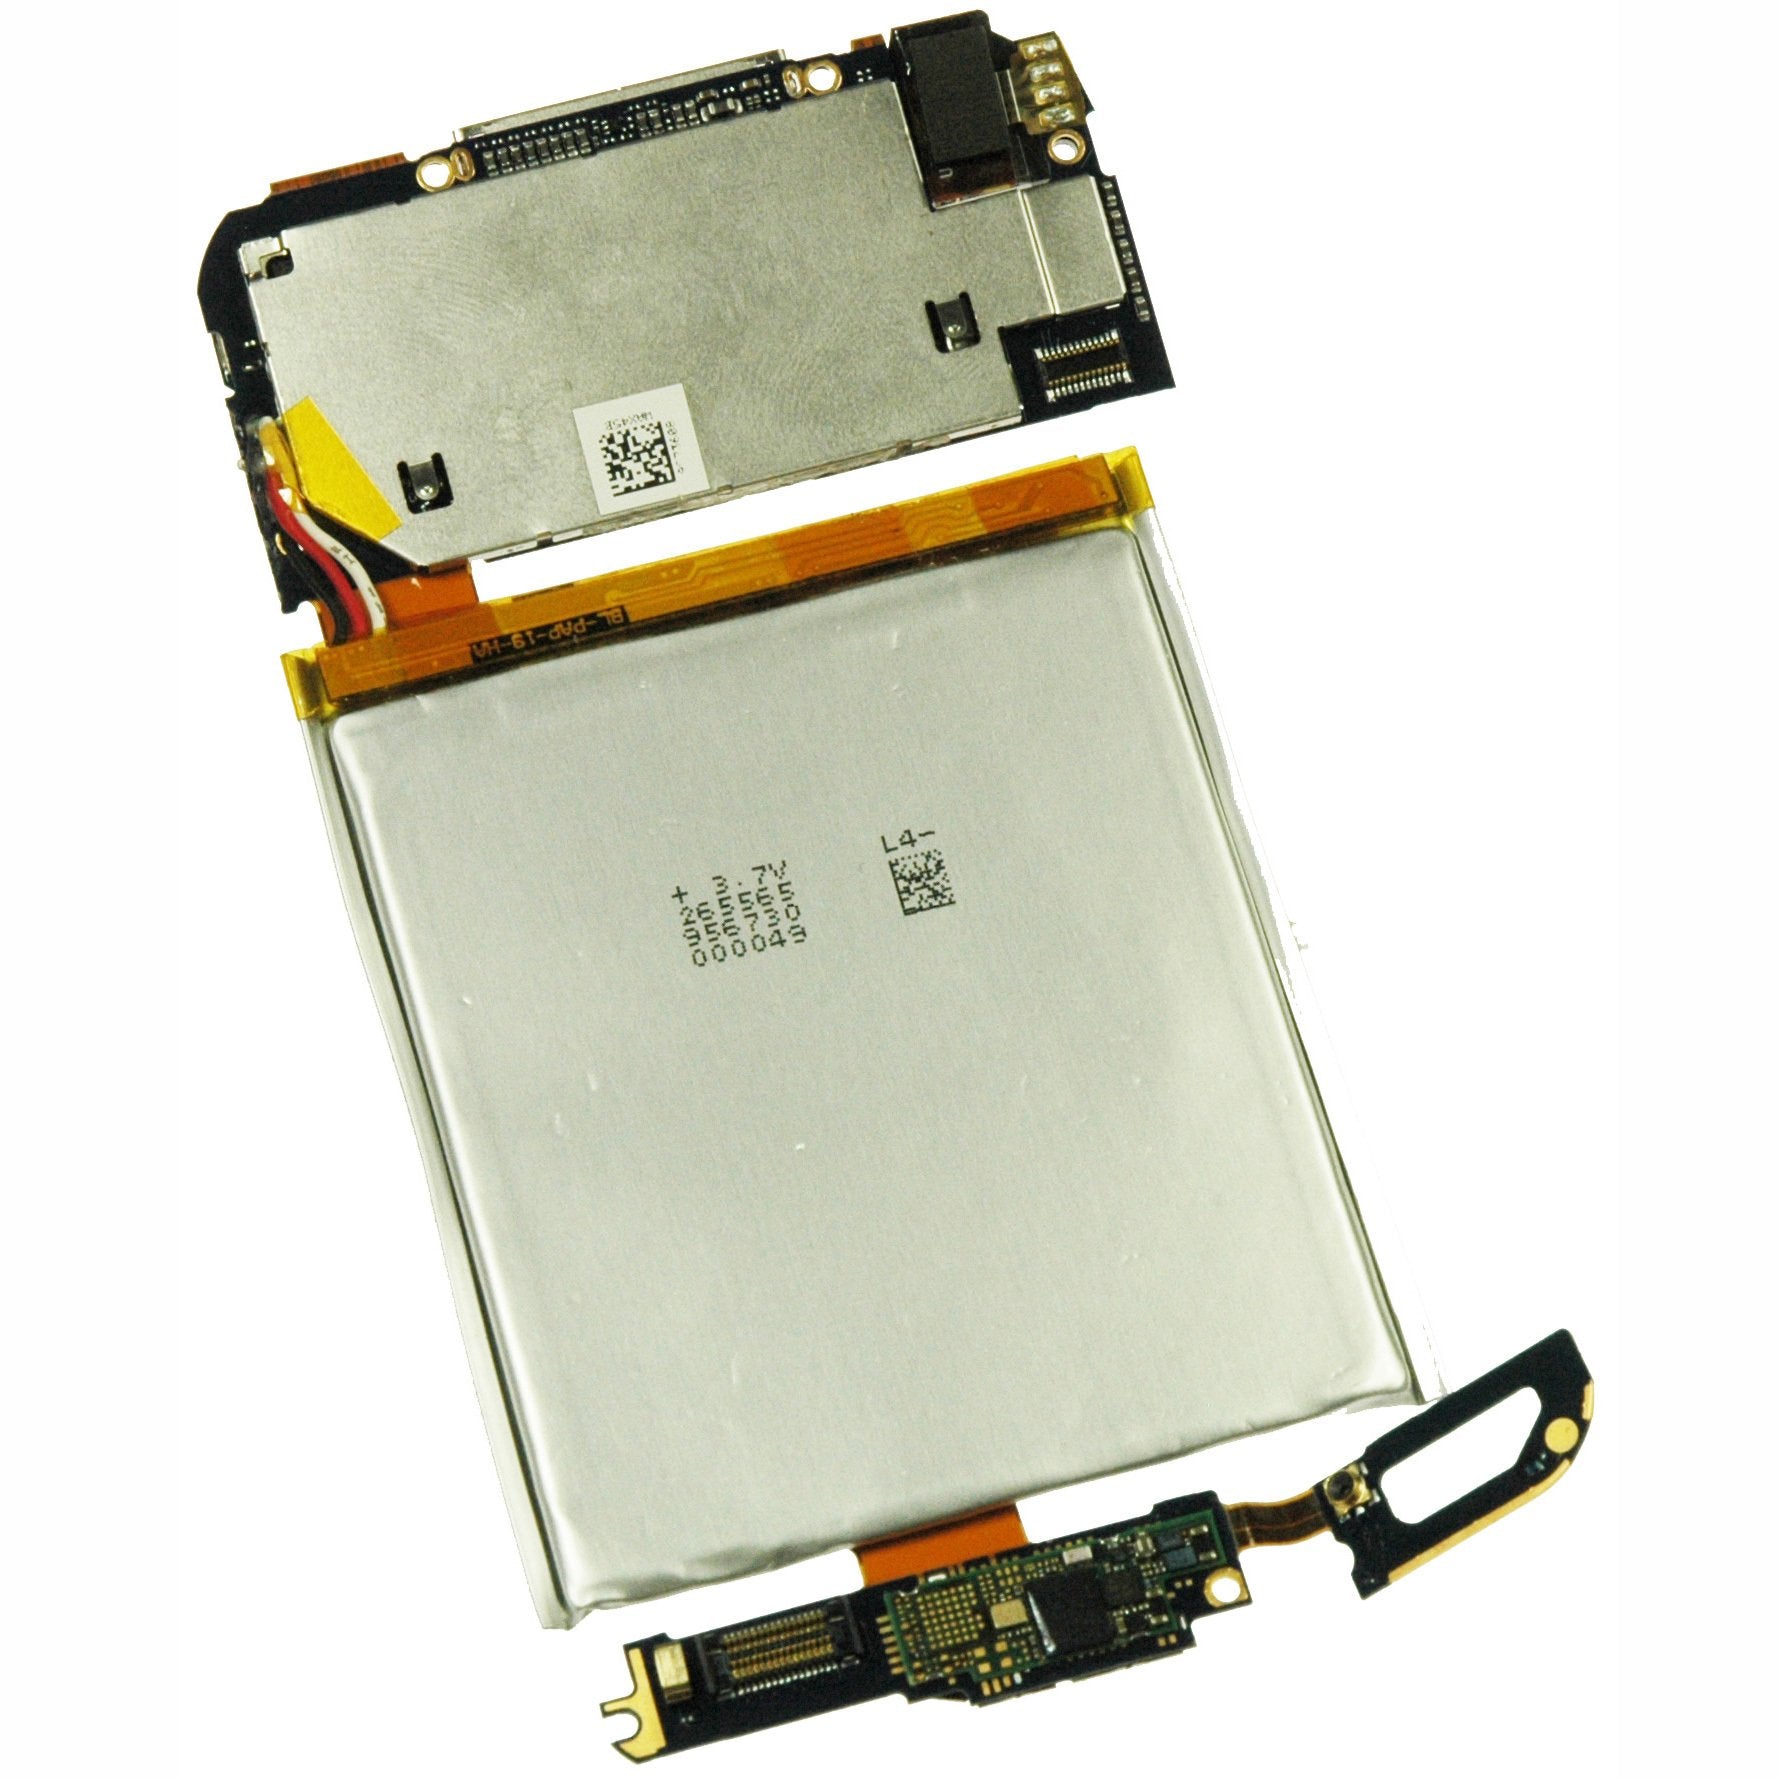 iPod touch (Gen 1) 8 GB Logic Board and Battery